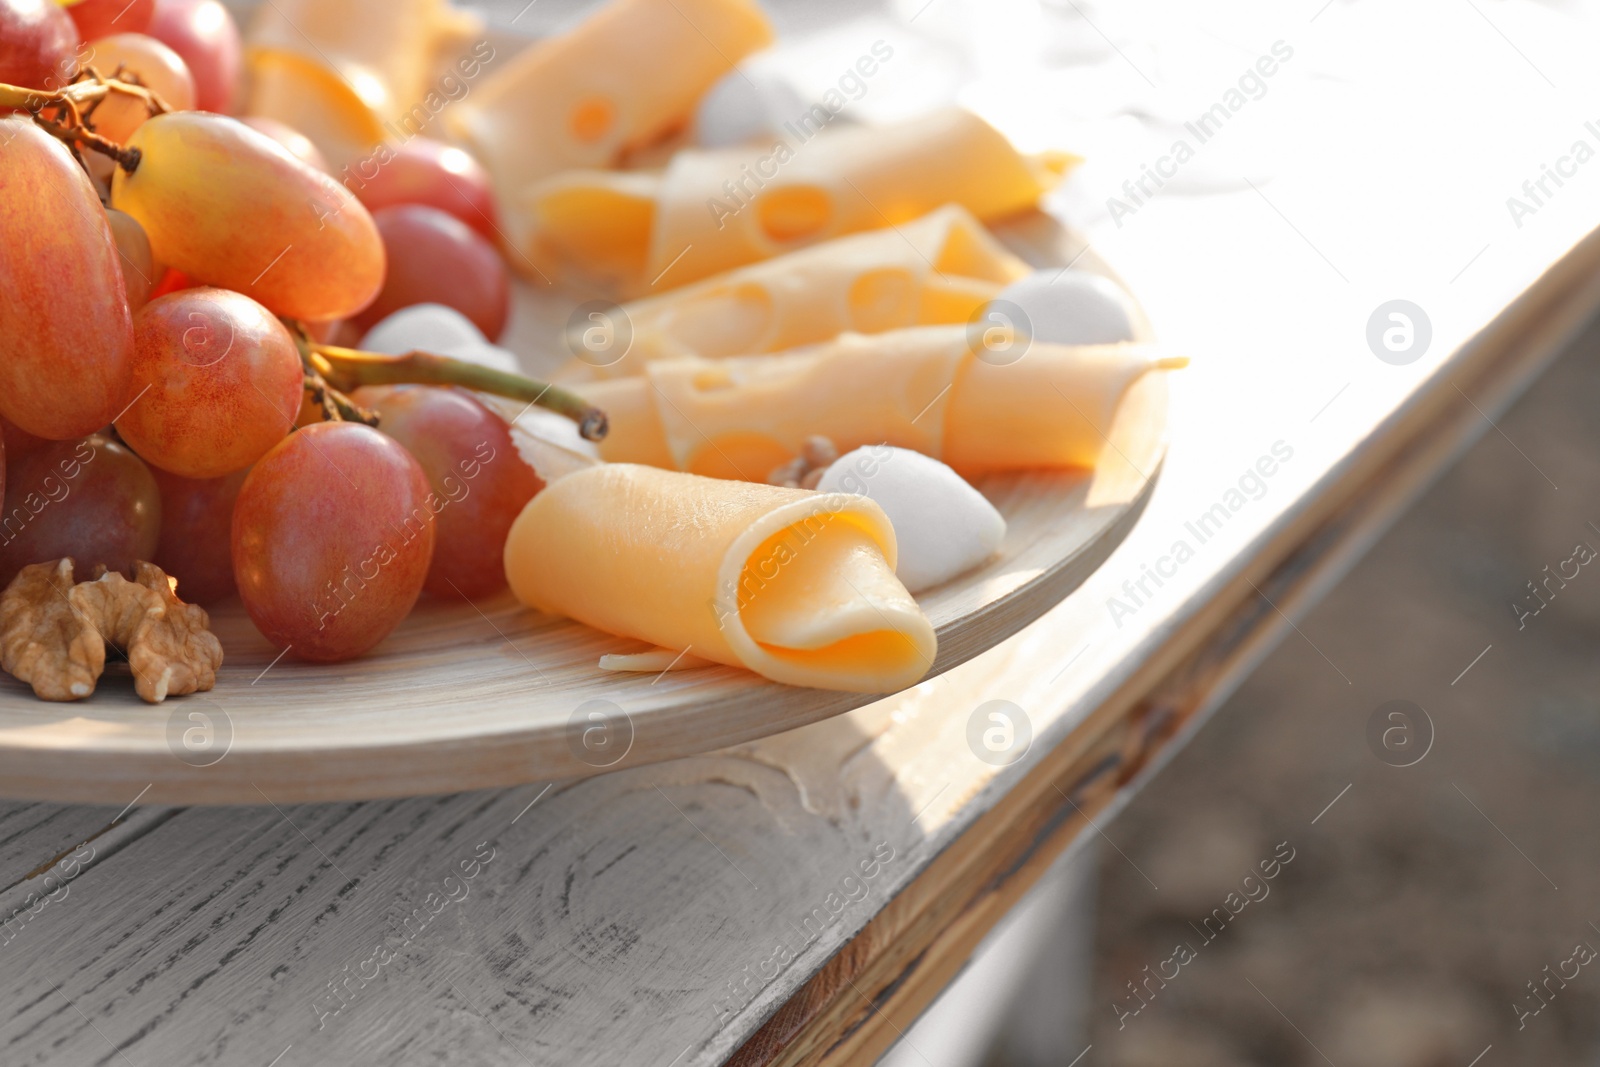 Photo of Plate with cheese and grapes on white wooden table outdoors, closeup view